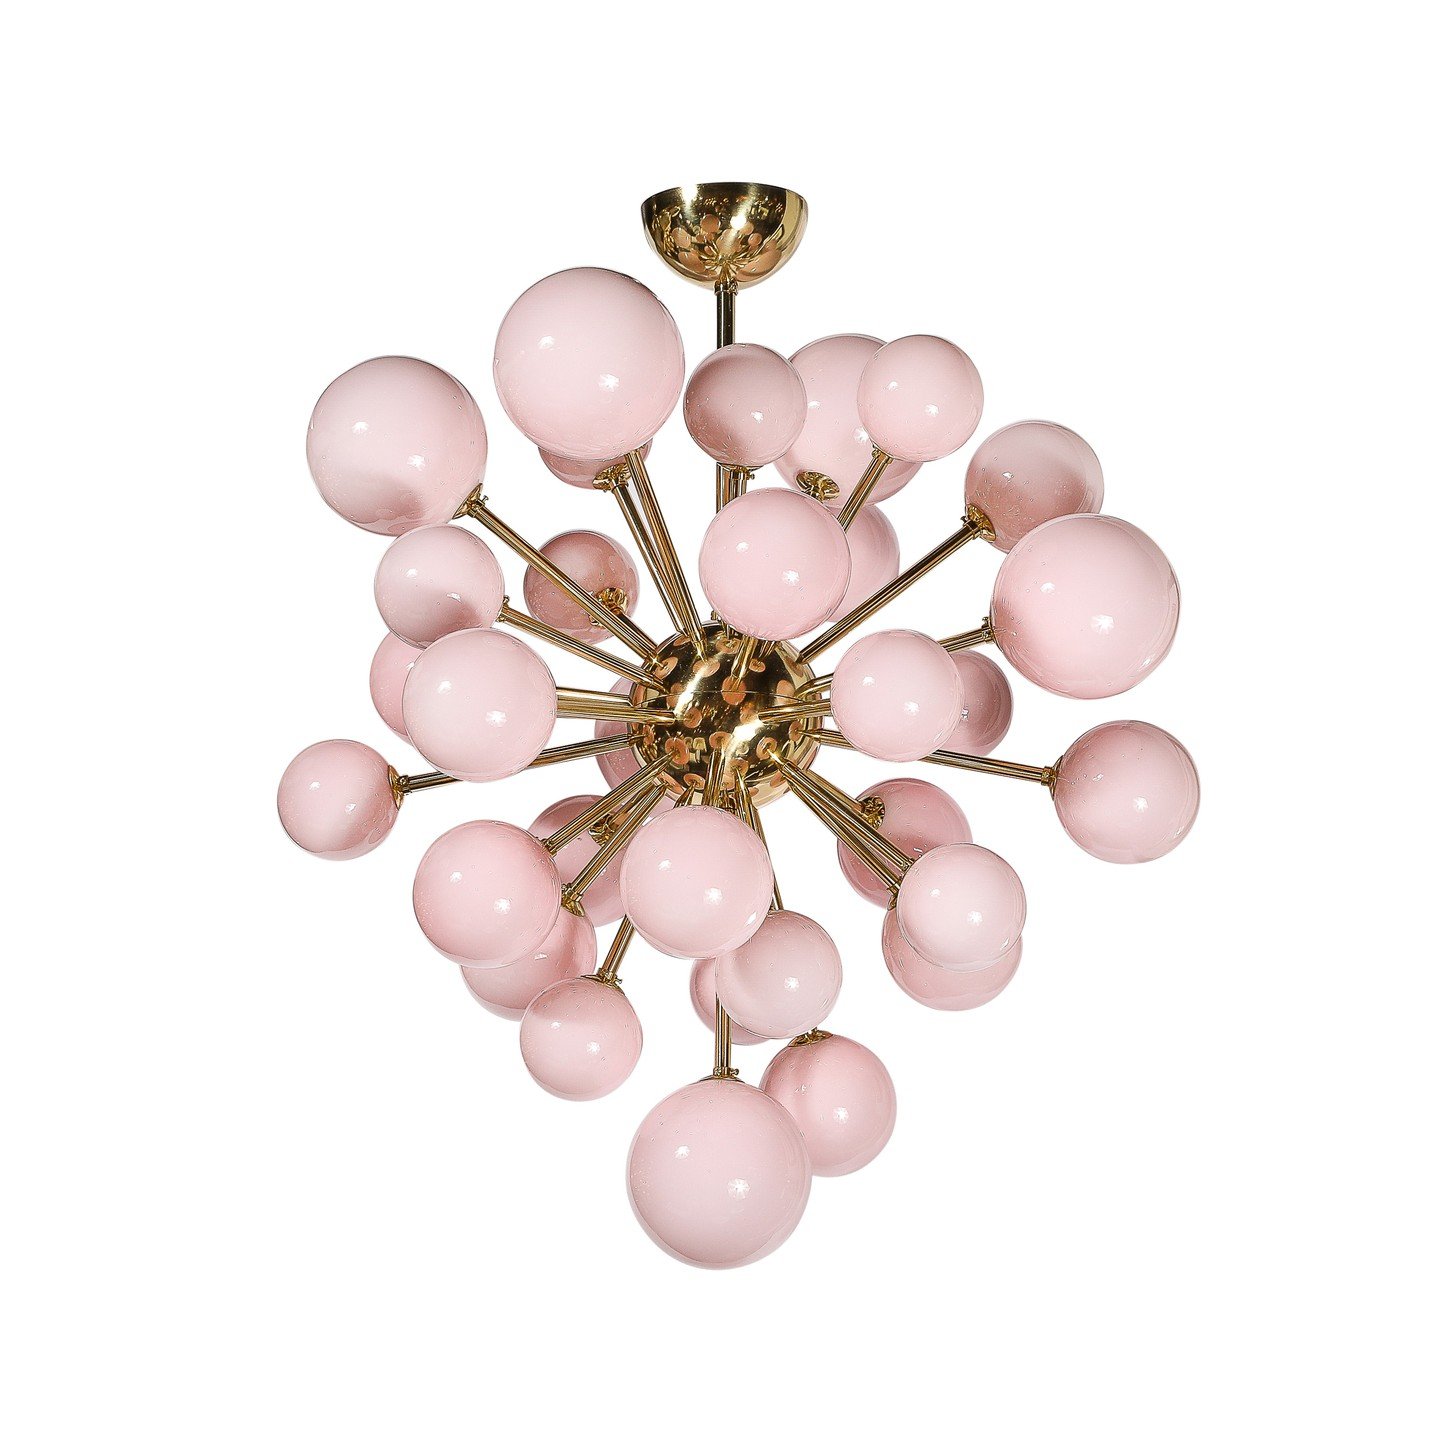 Modernist Handblown Murano Frosted Pink Hue Glass &amp; Brass Sputnik Chandelier

This elegant and well balanced Modernist Handblown Murano Glass Sputnik Chandelier w/ Frosted Pink Hued Shades &amp; Brass Fittings originates from Italy during the 21s